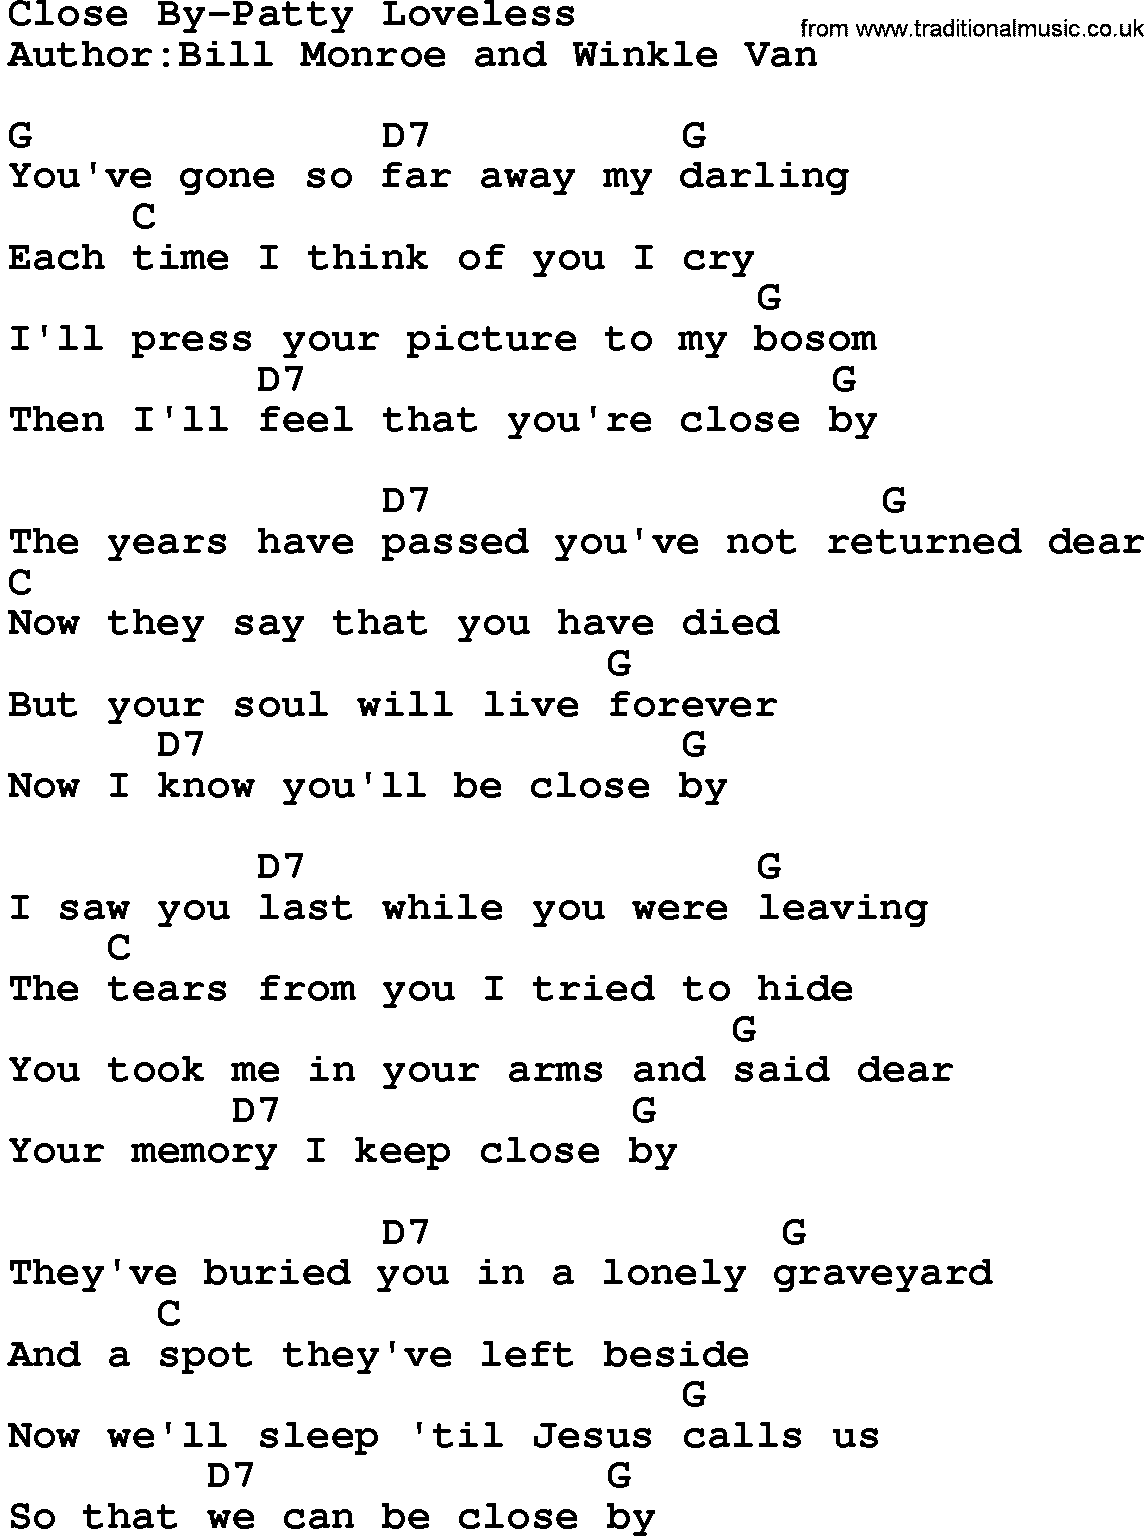 Country music song: Close By-Patty Loveless lyrics and chords